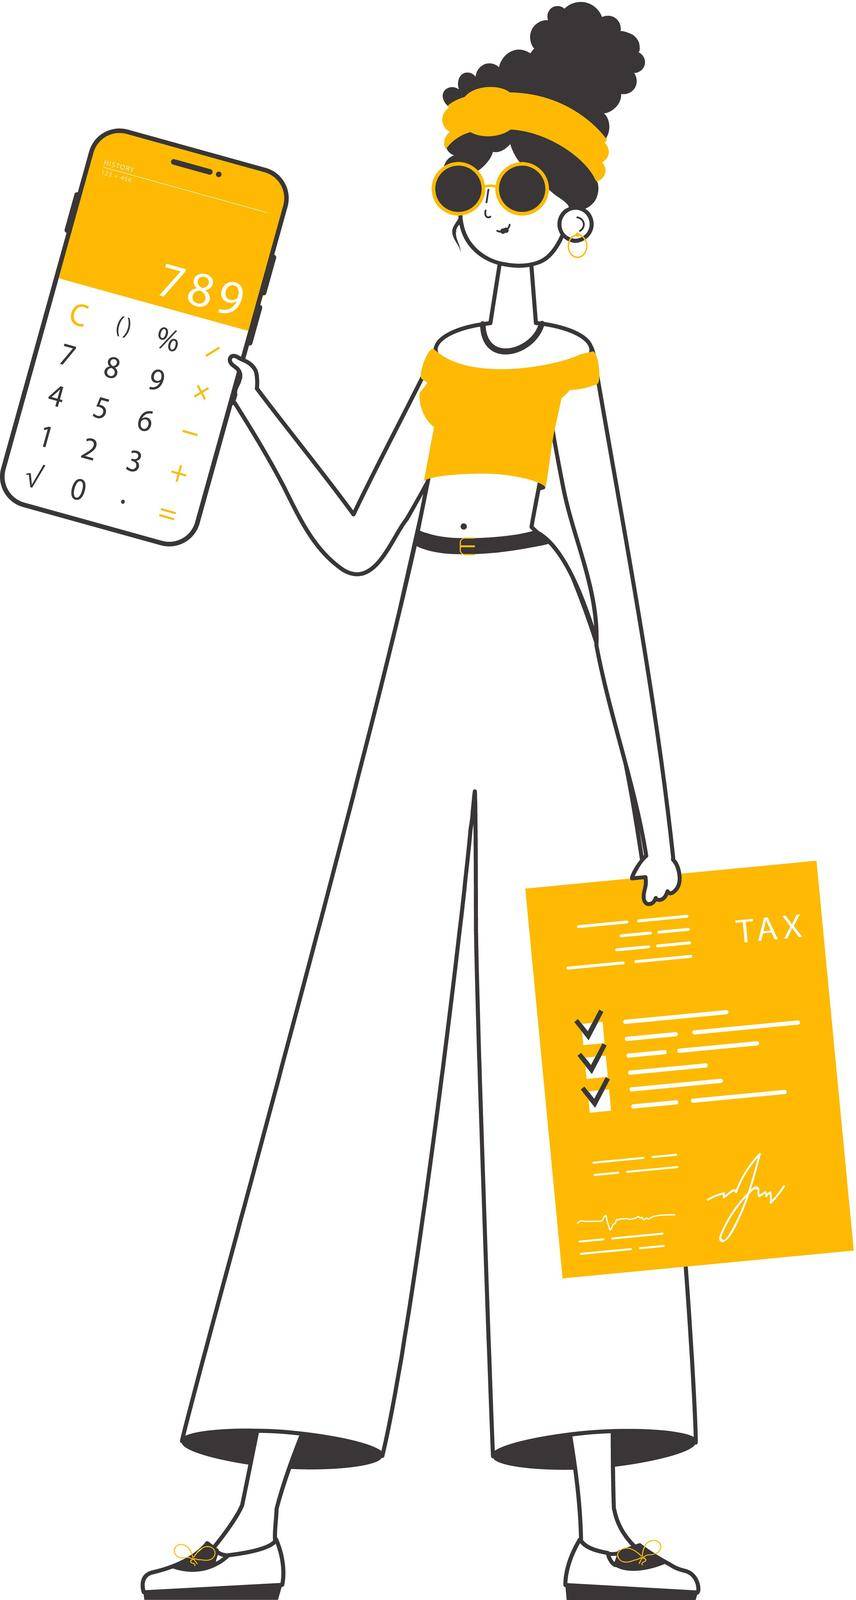 A woman holds a calculator and a tax form in her hands. Linear trendy style. Isolated. Vector illustration.